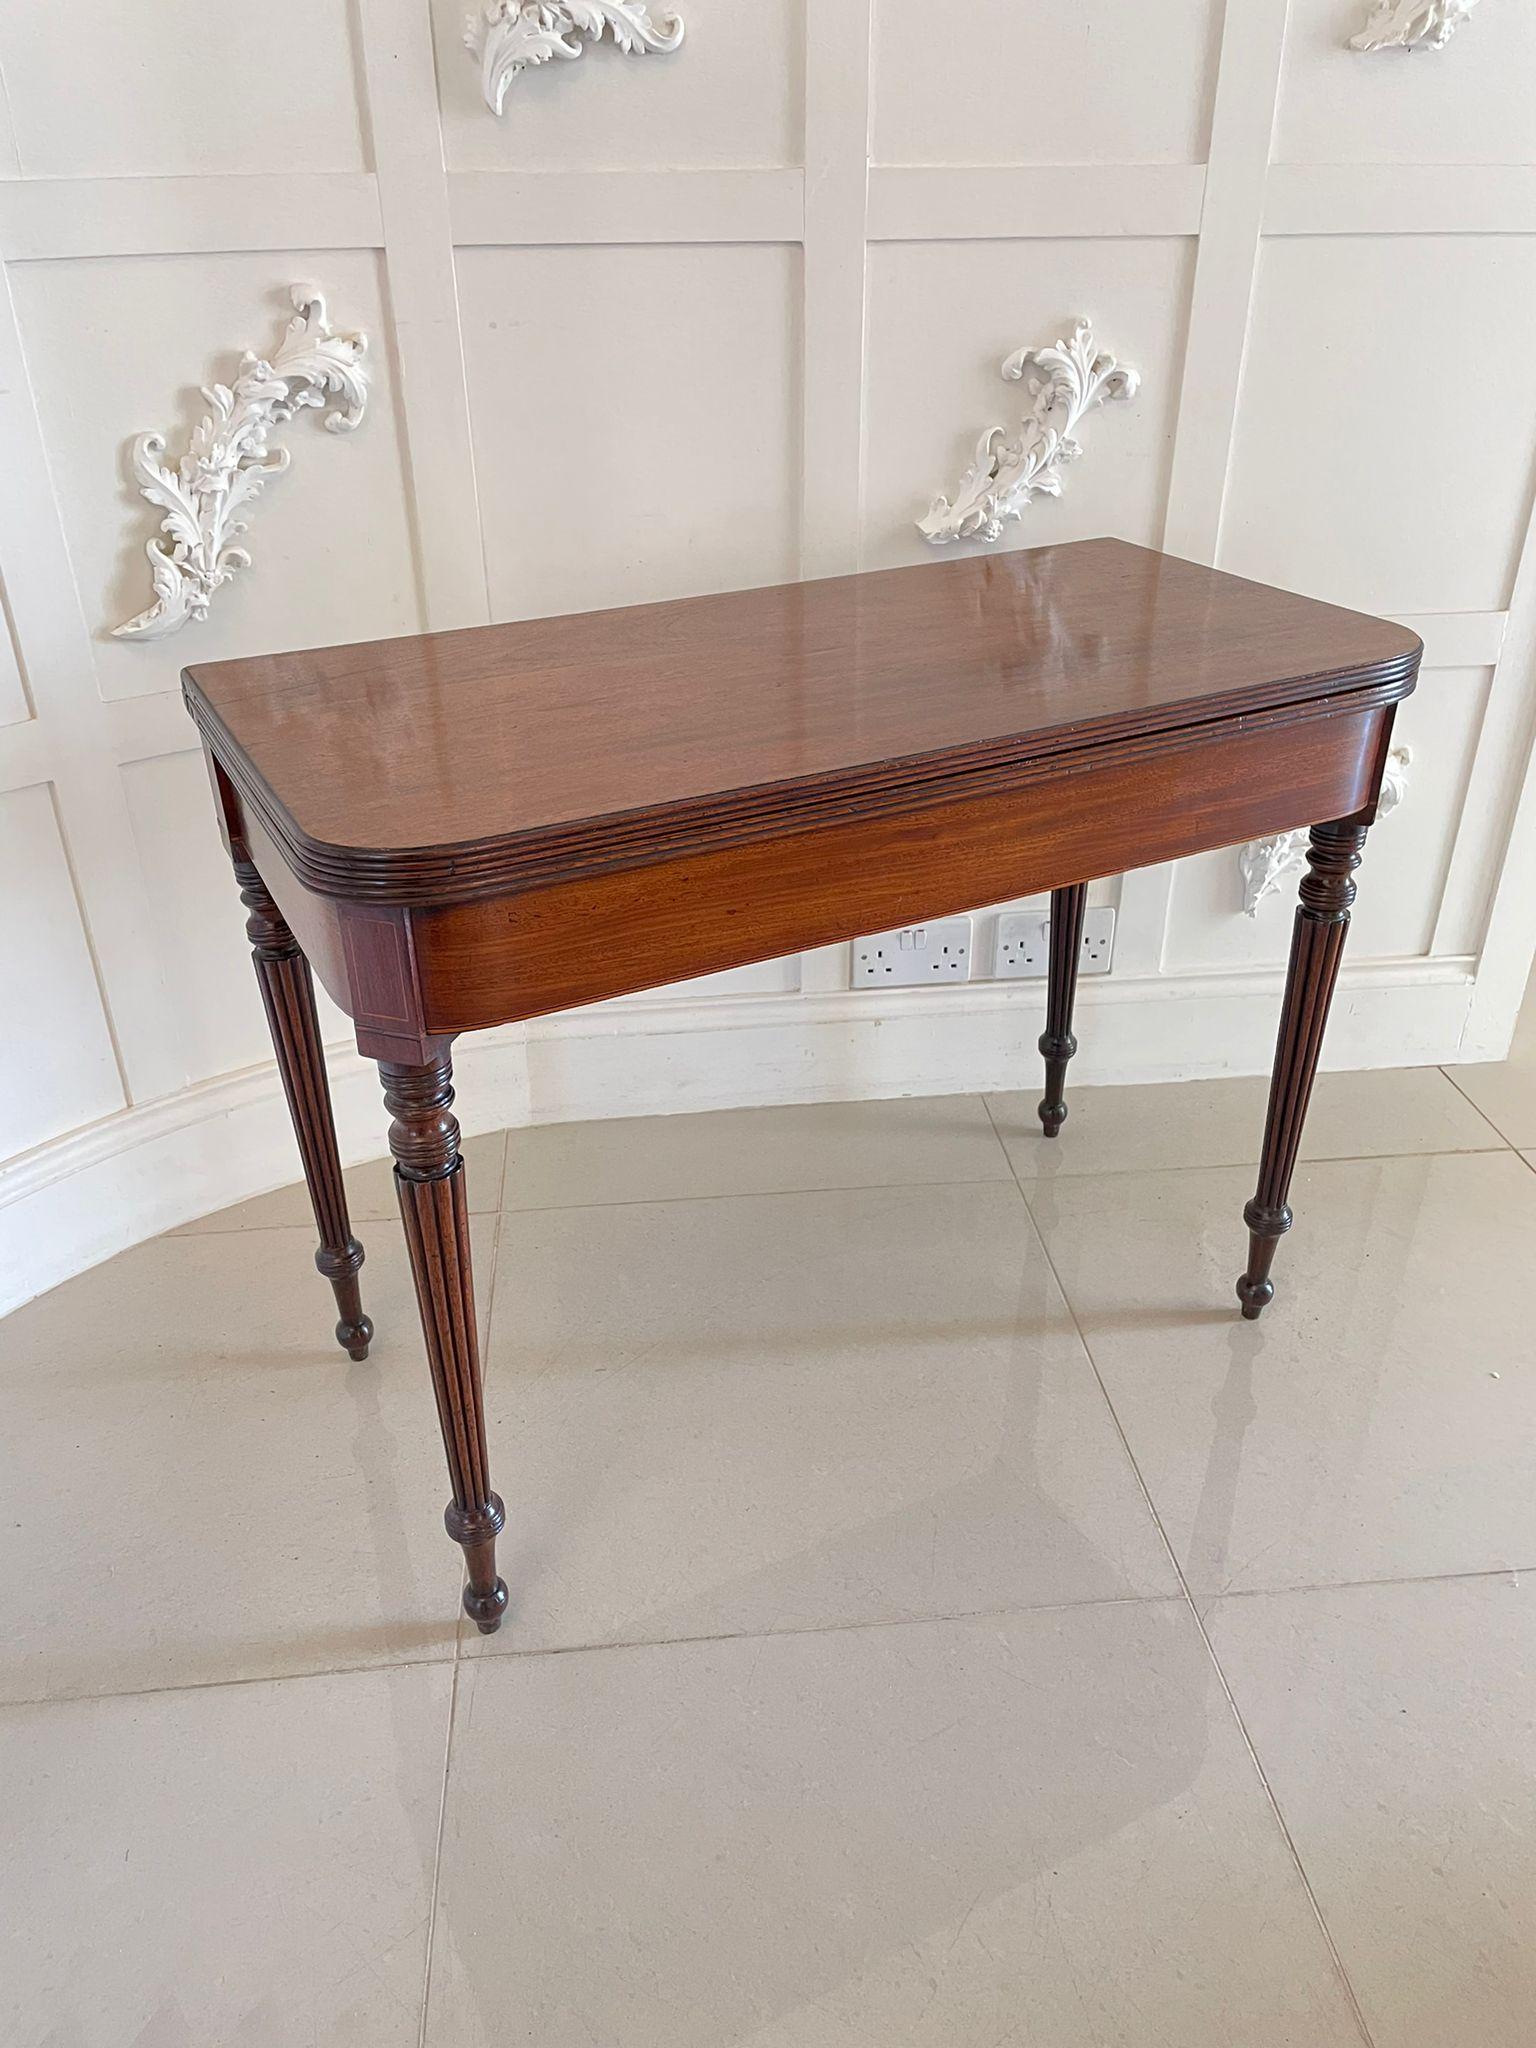 Antique regency quality mahogany card/side table having a quality mahogany top with a reeded edge opening to reveal the original baize interior, mahogany frieze with inlaid satinwood stringing and standing on four quality mahogany reeded tapering